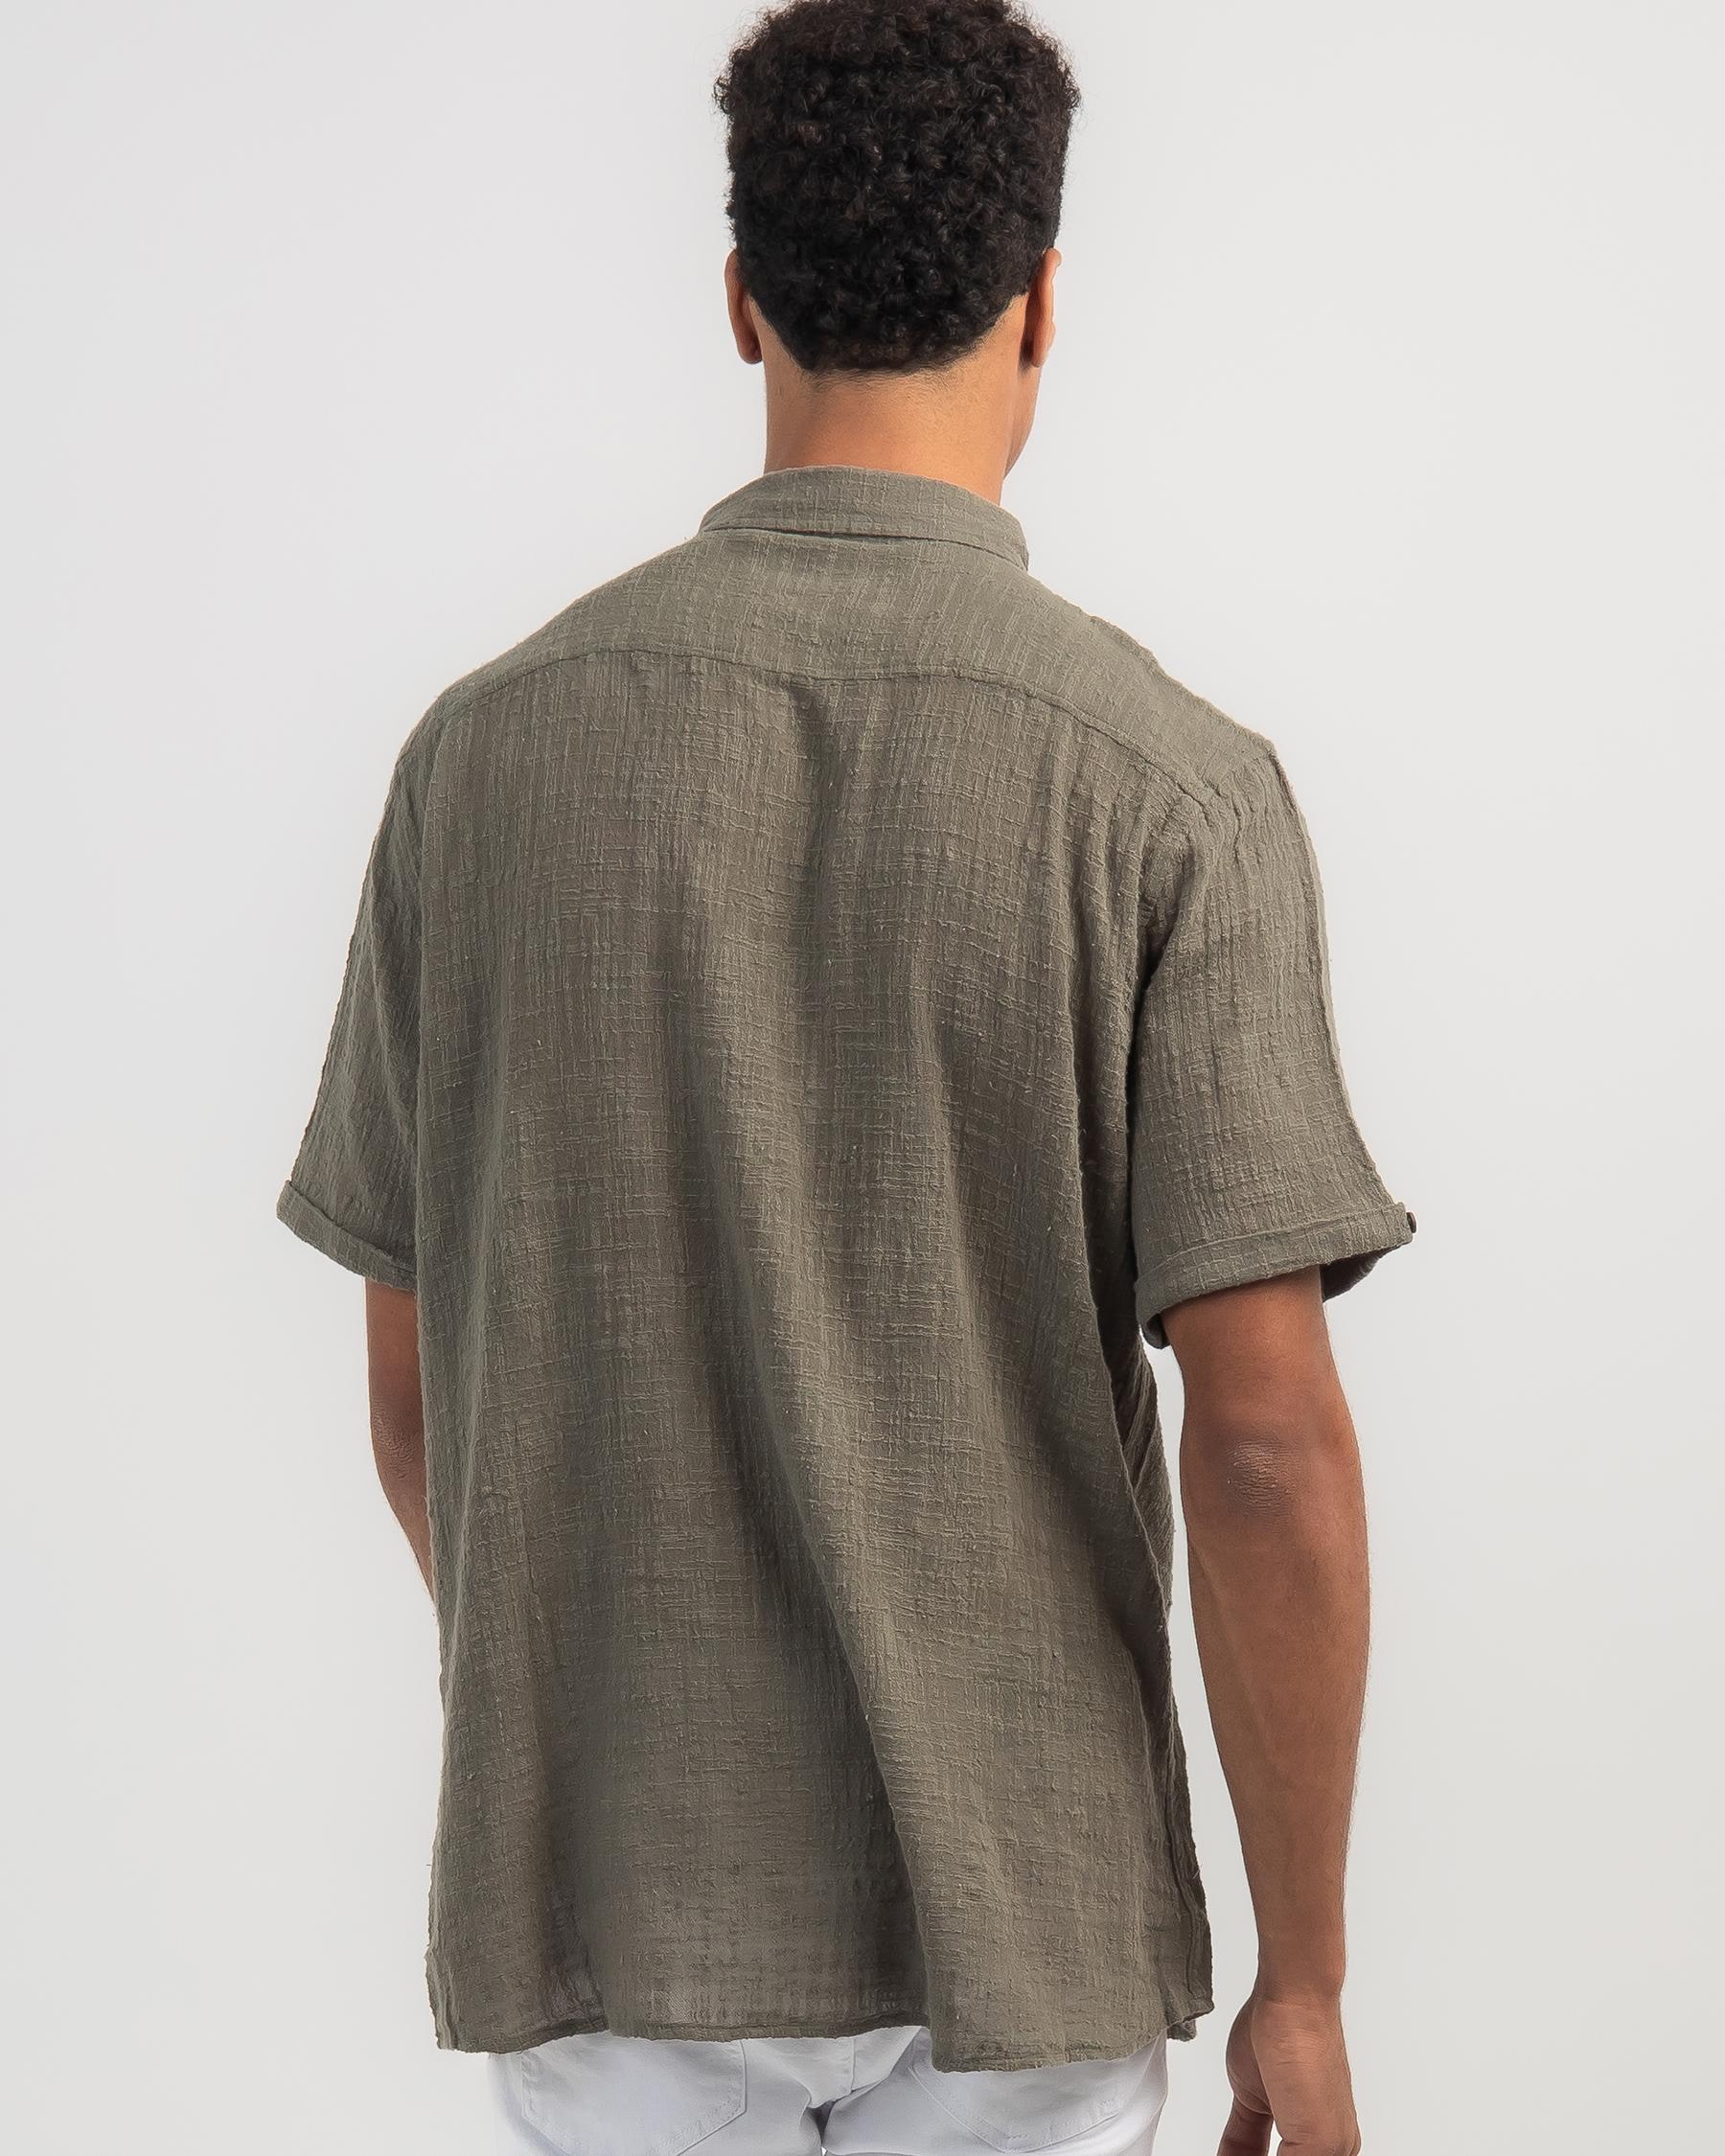 Lucid Woven Short Sleeve Shirt In Olive - Fast Shipping & Easy Returns ...